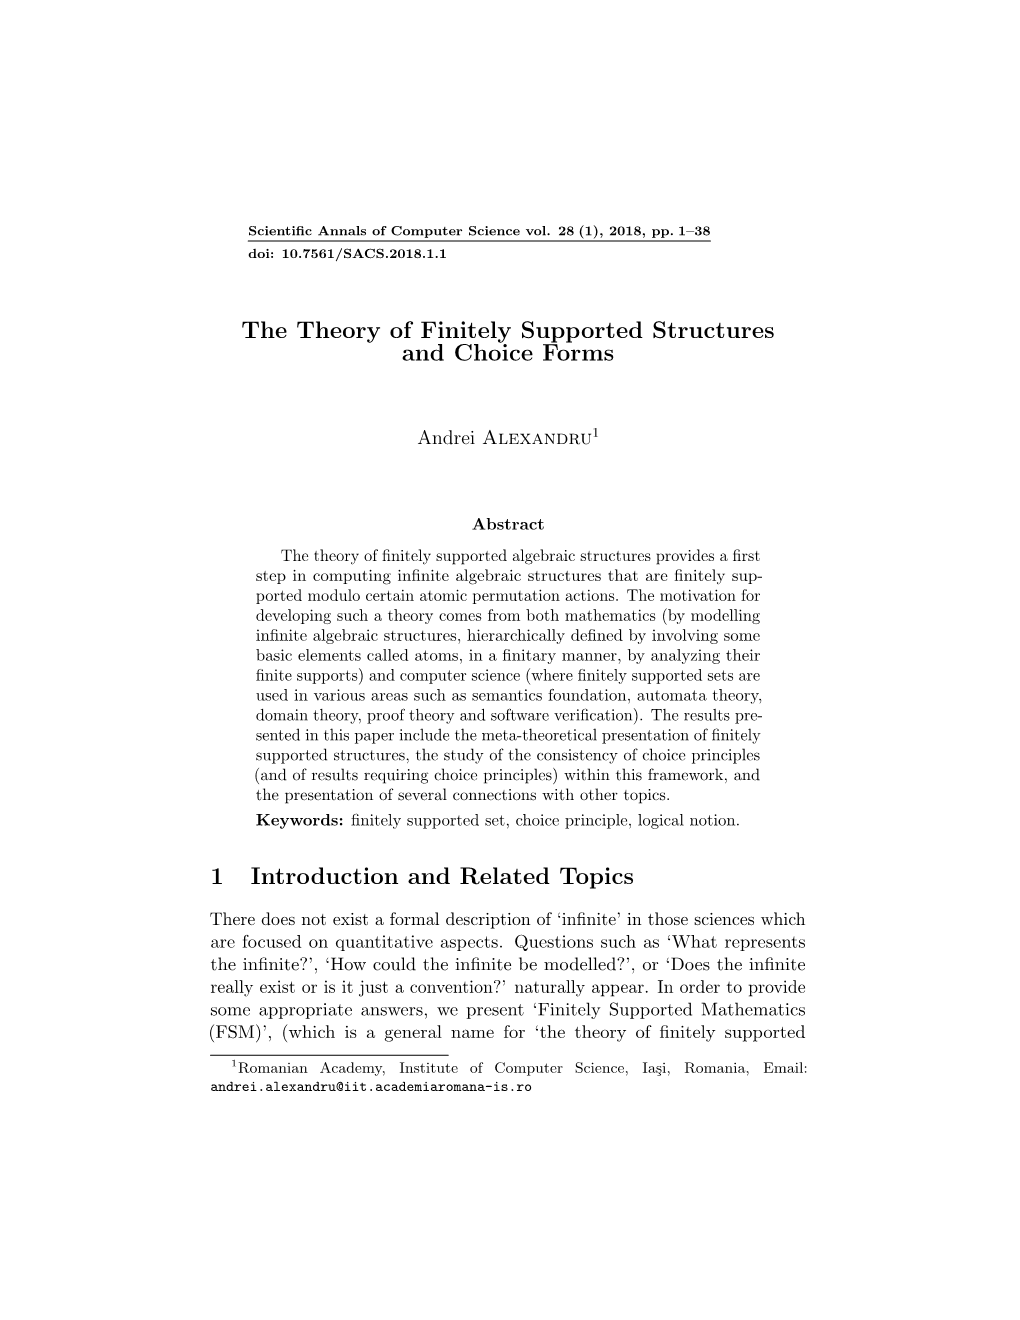 The Theory of Finitely Supported Structures and Choice Forms 11